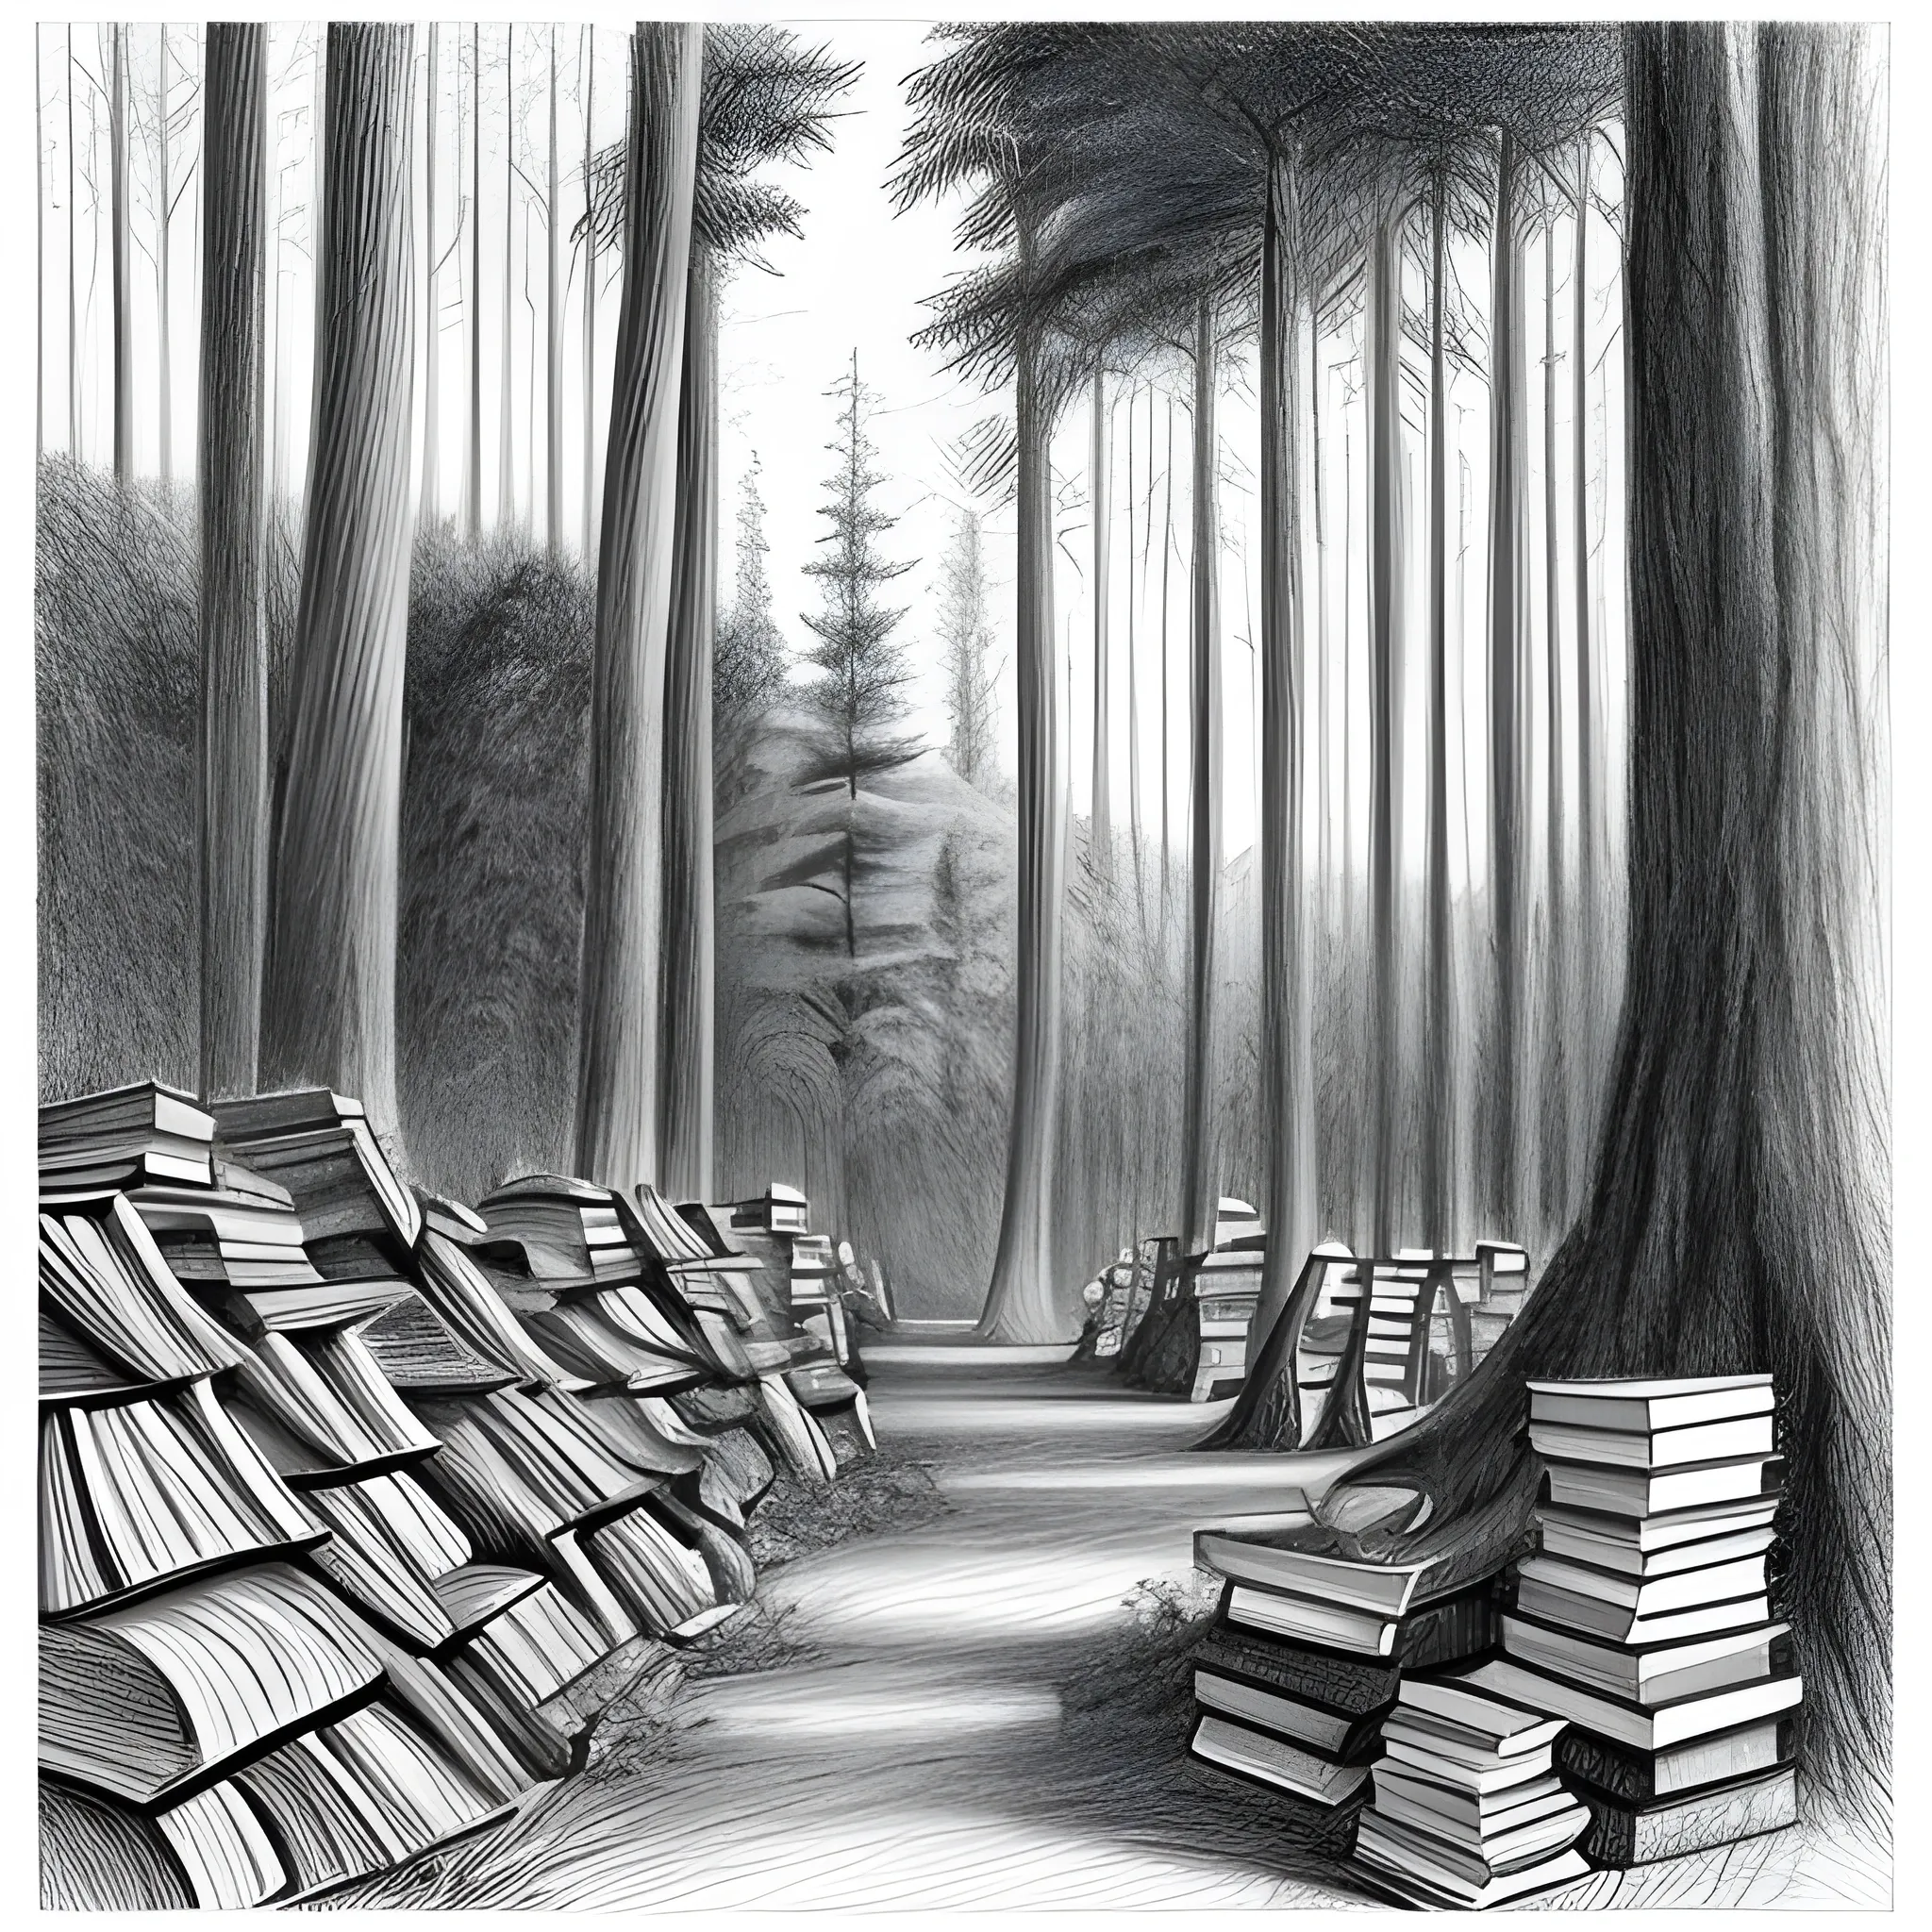 pencil sketch of books in the forest